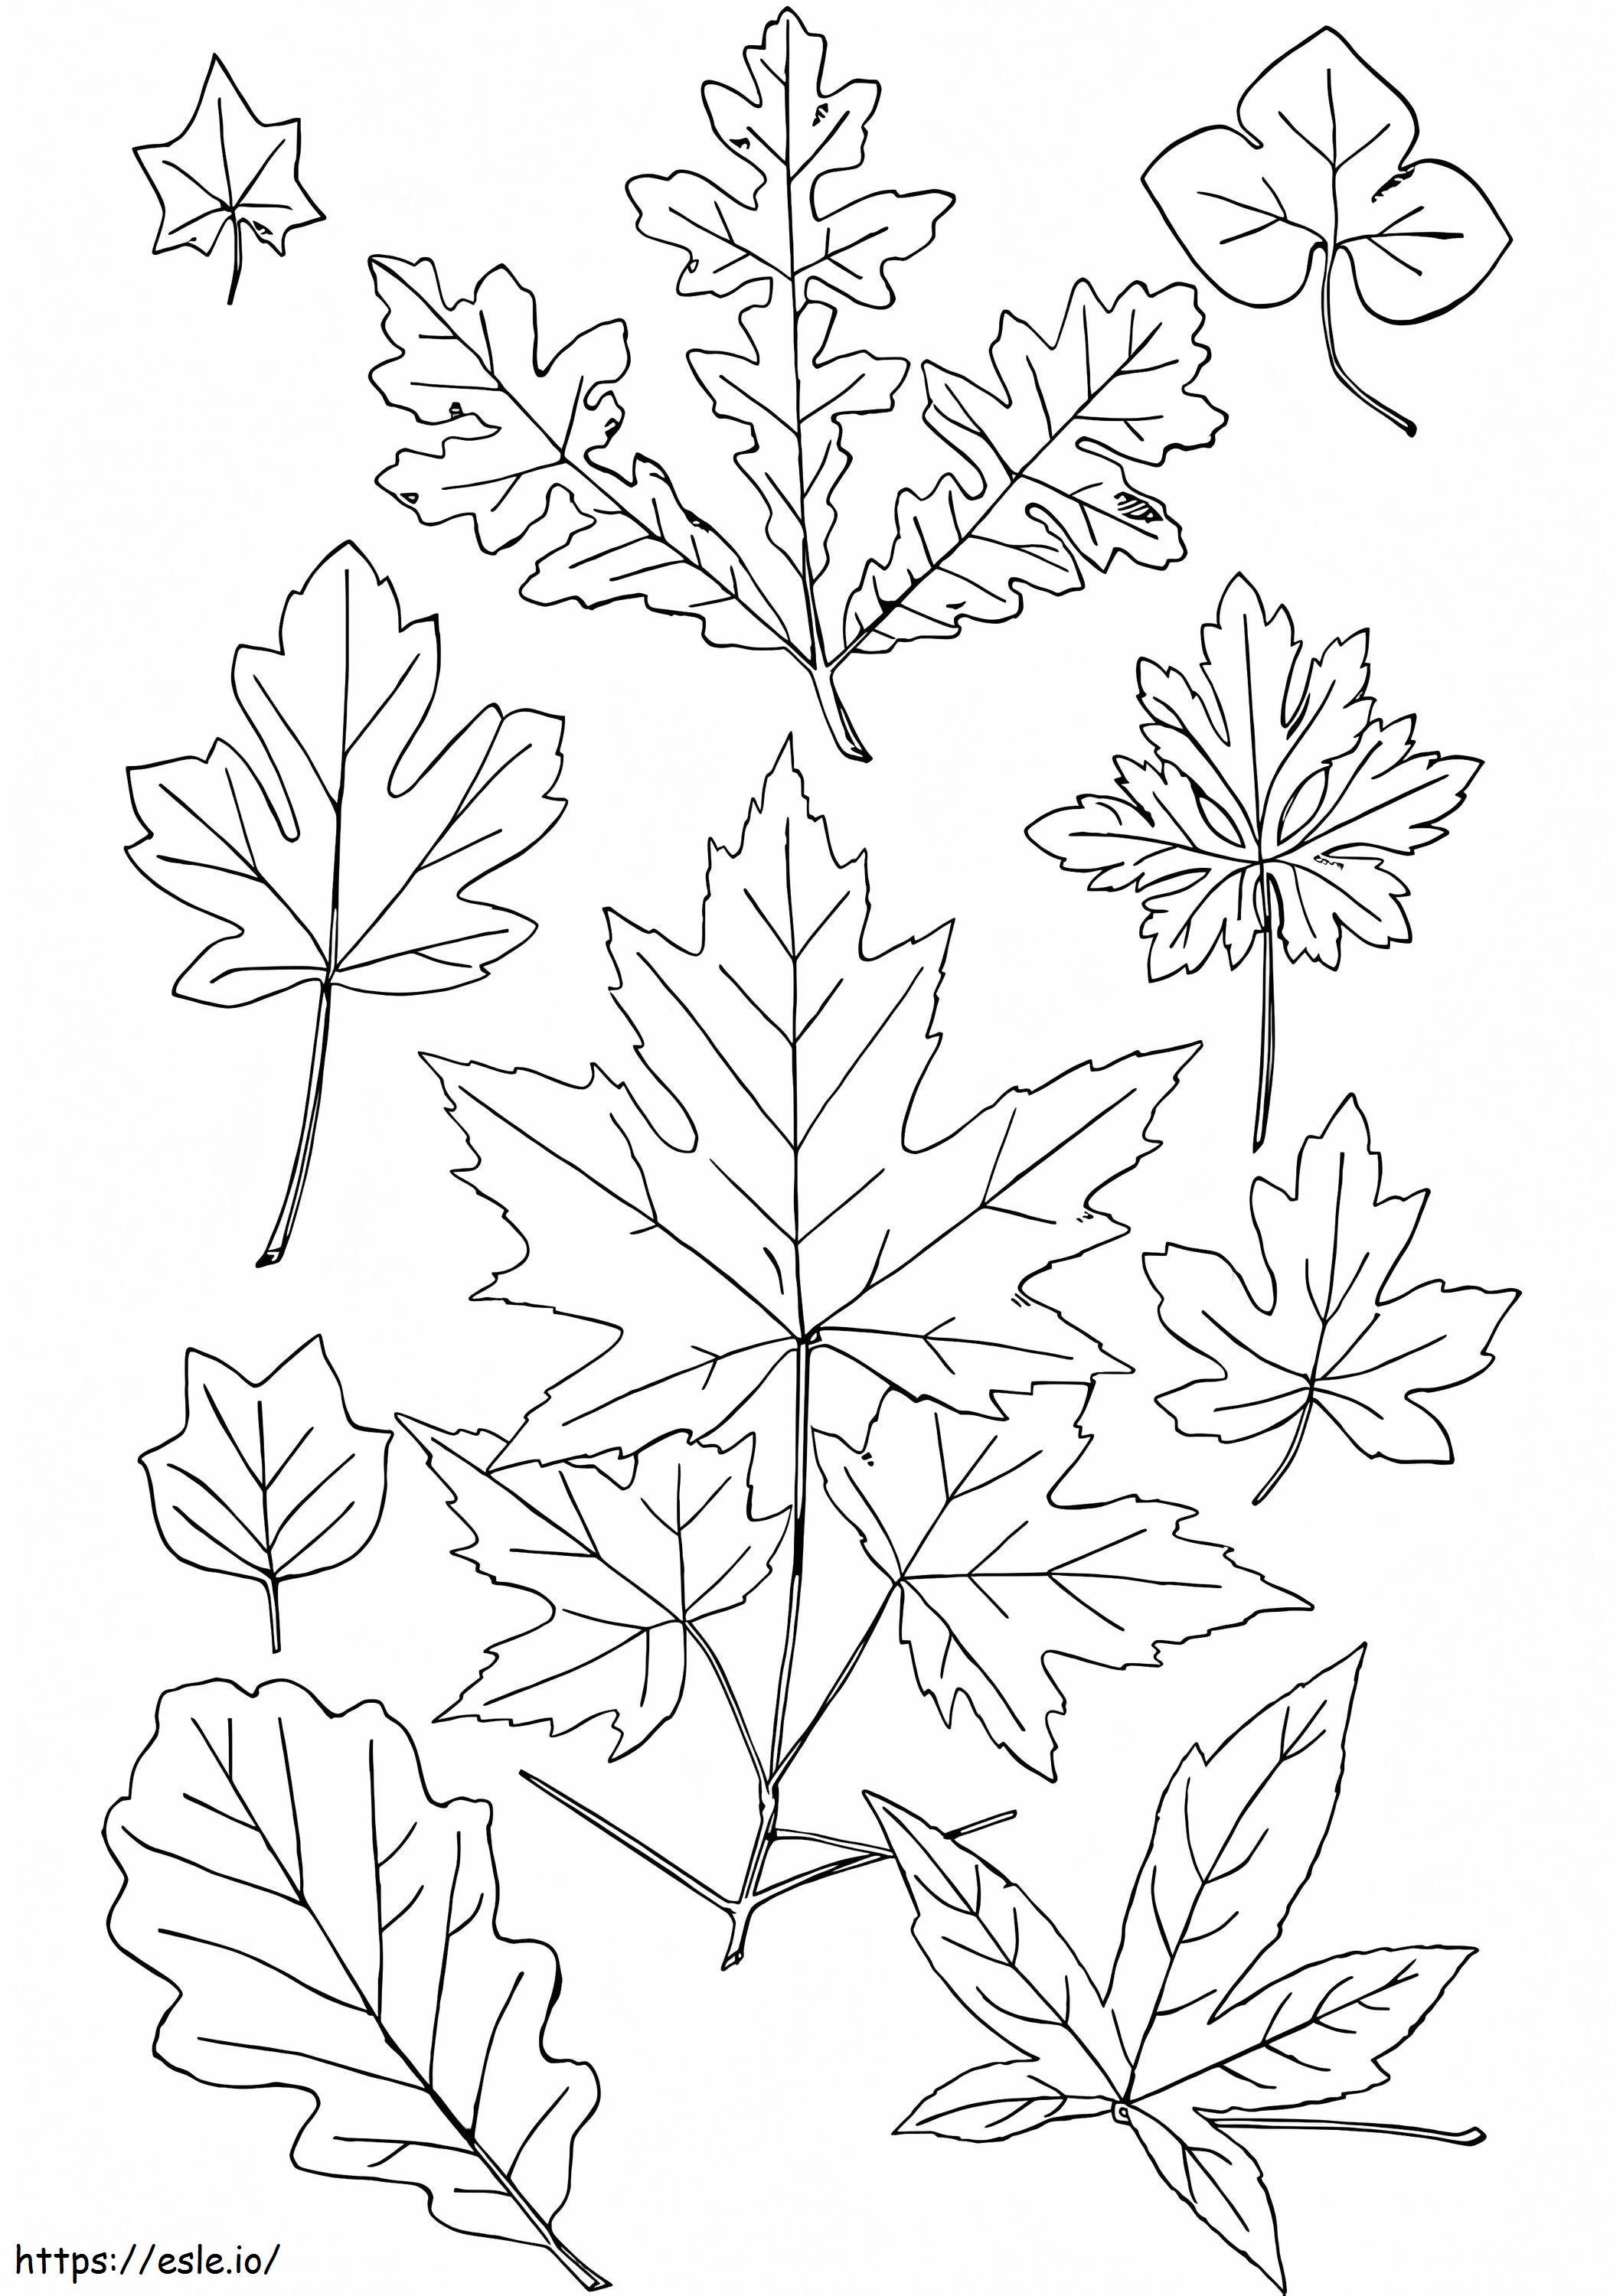 Fall Leaves 4 coloring page